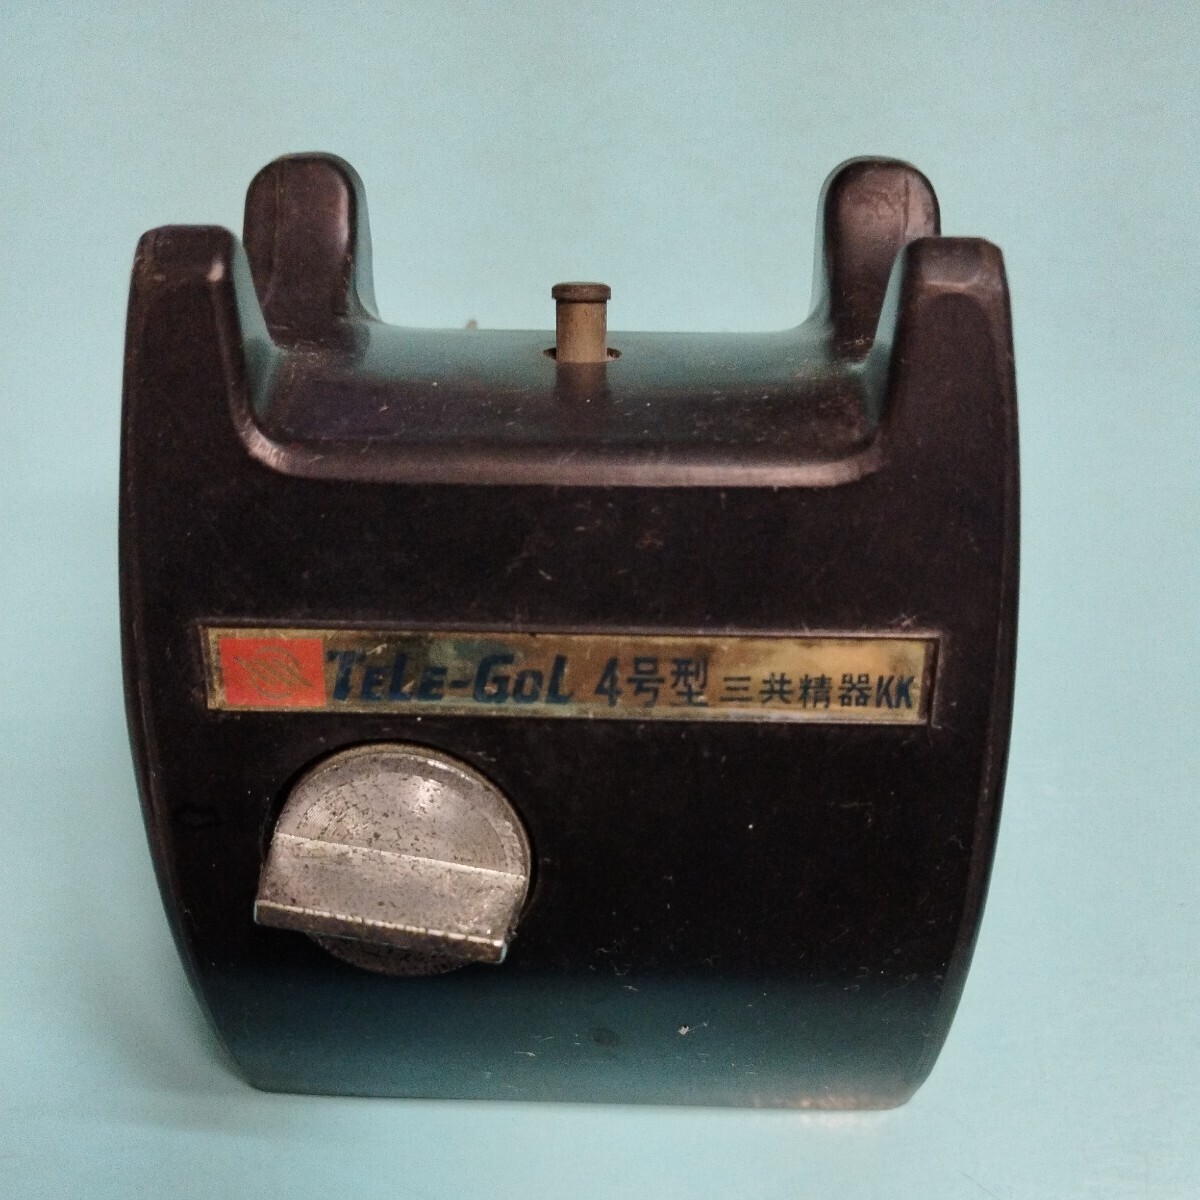  black telephone for music box TELE-GOL 4 number type three also . vessel 